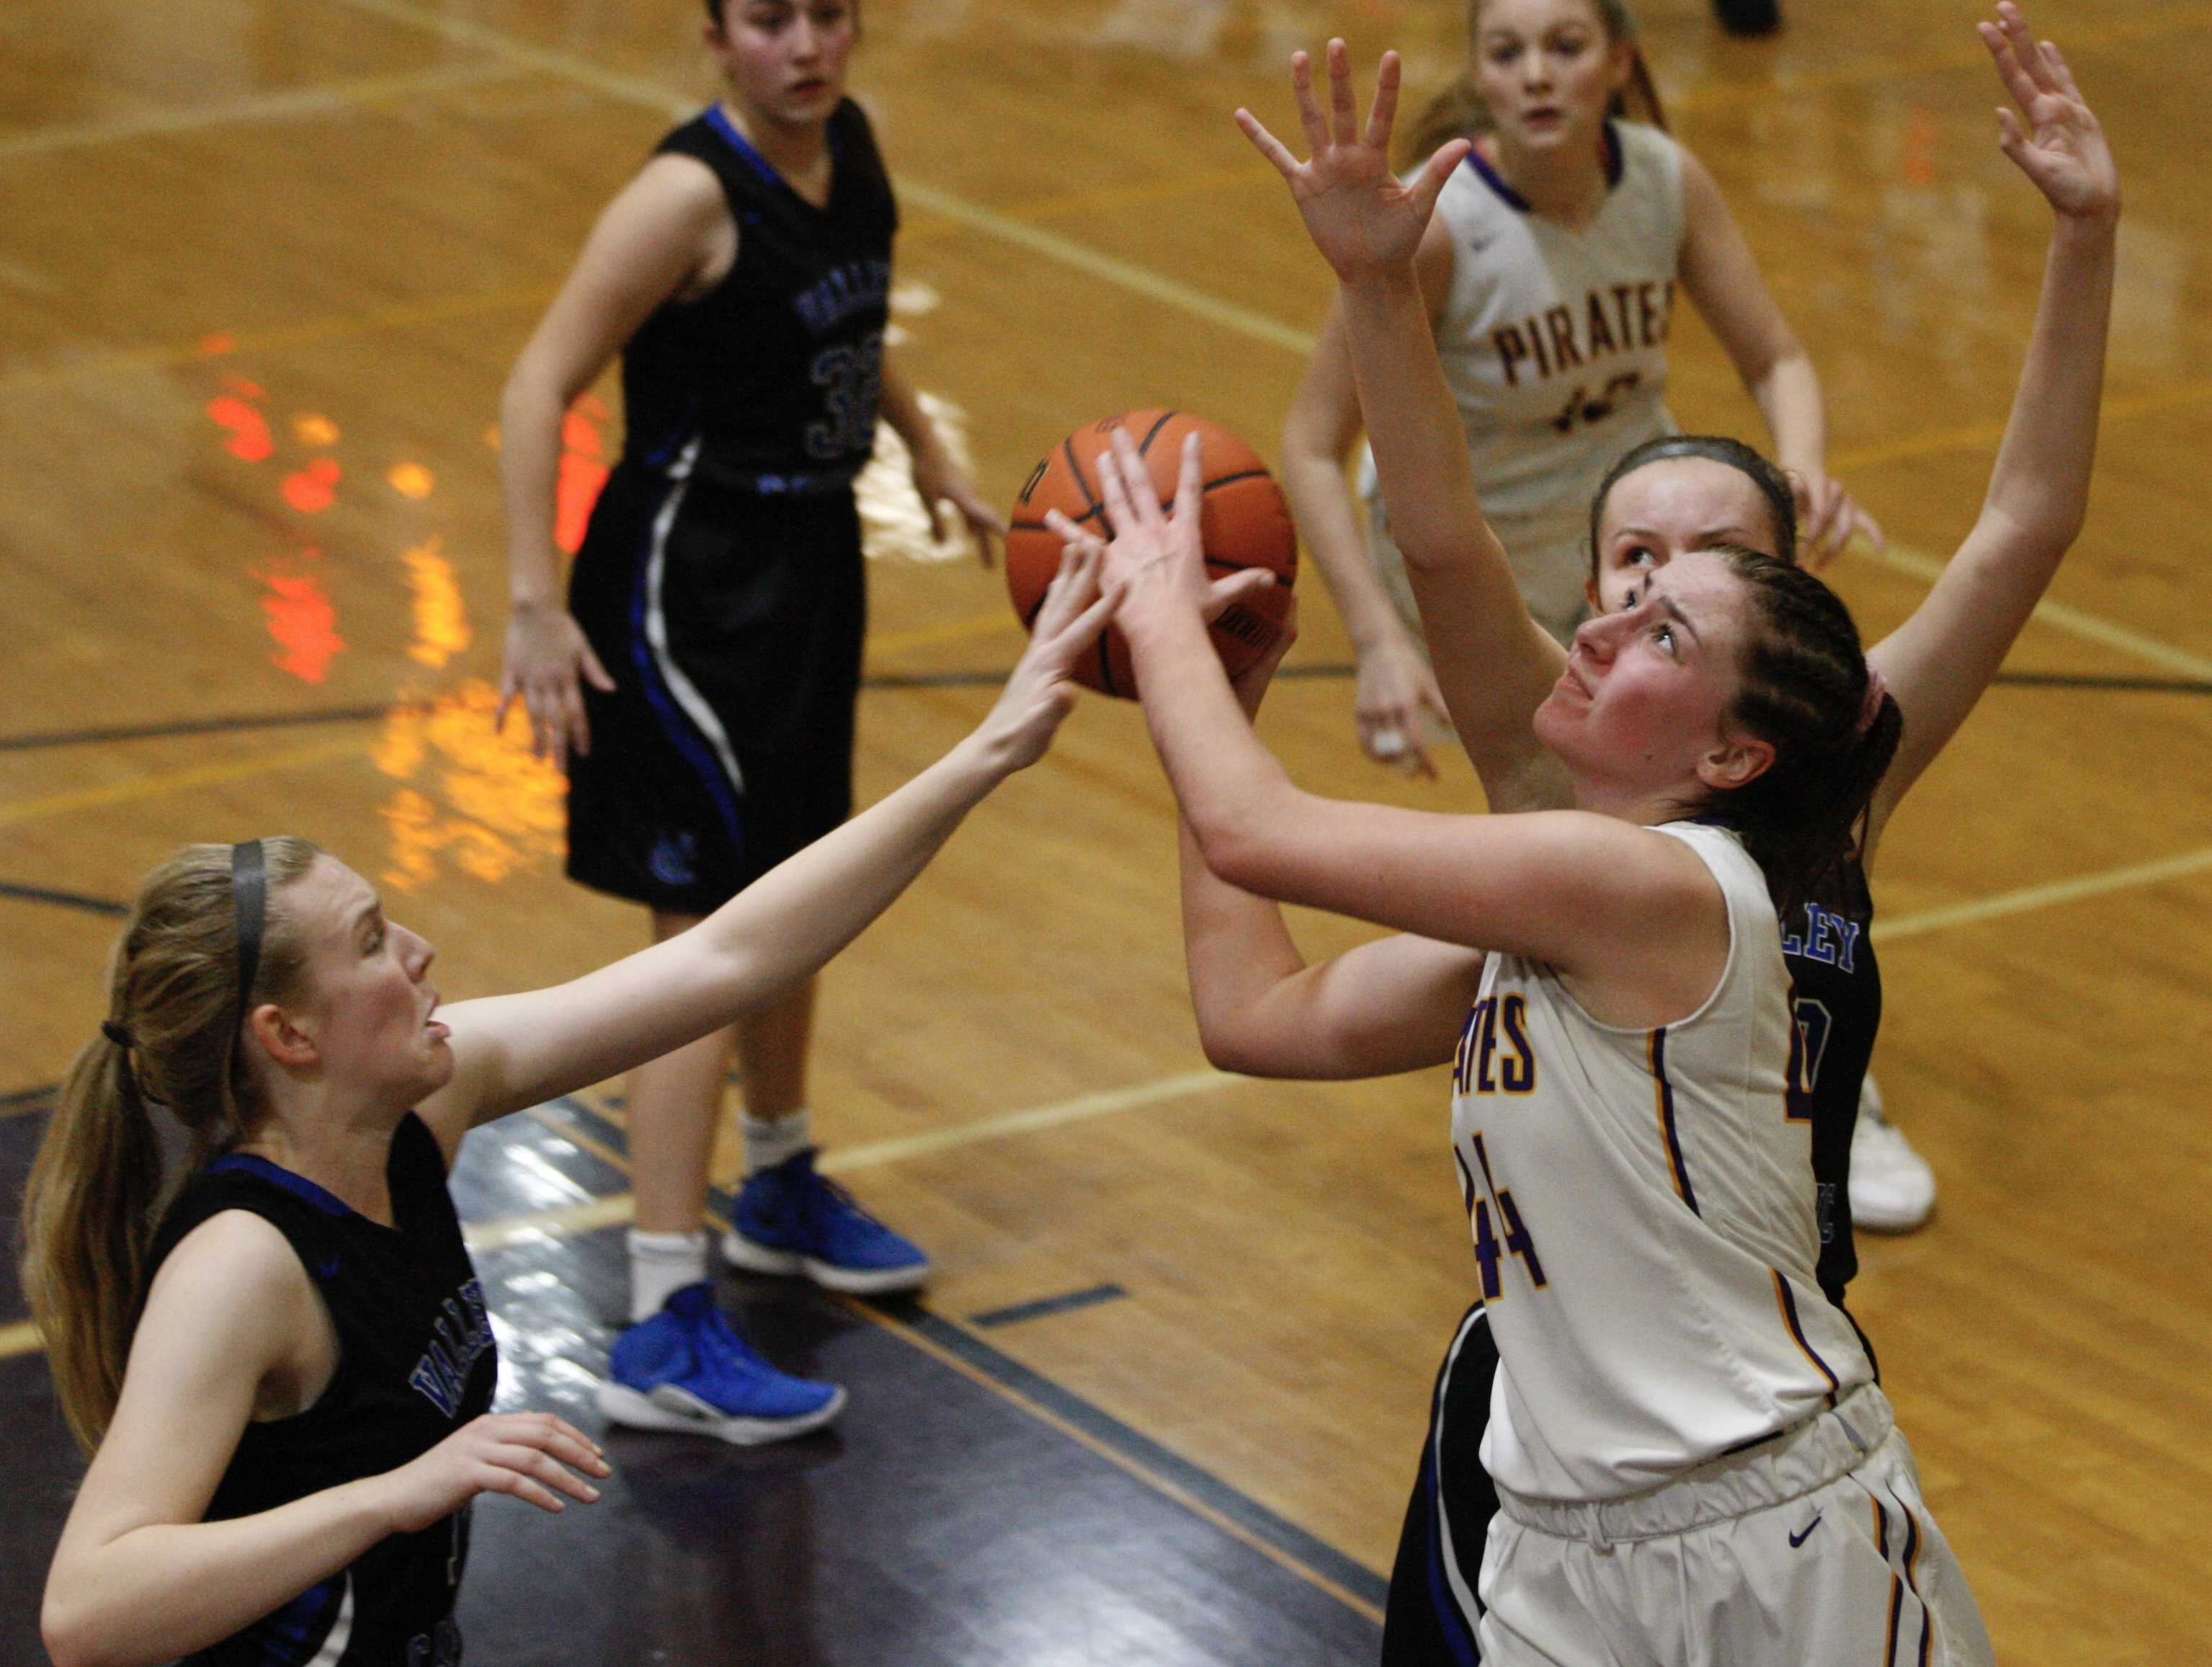 Marshfield's Alex Locati slices between two Valley Catholic defenders for two of her 12 points.